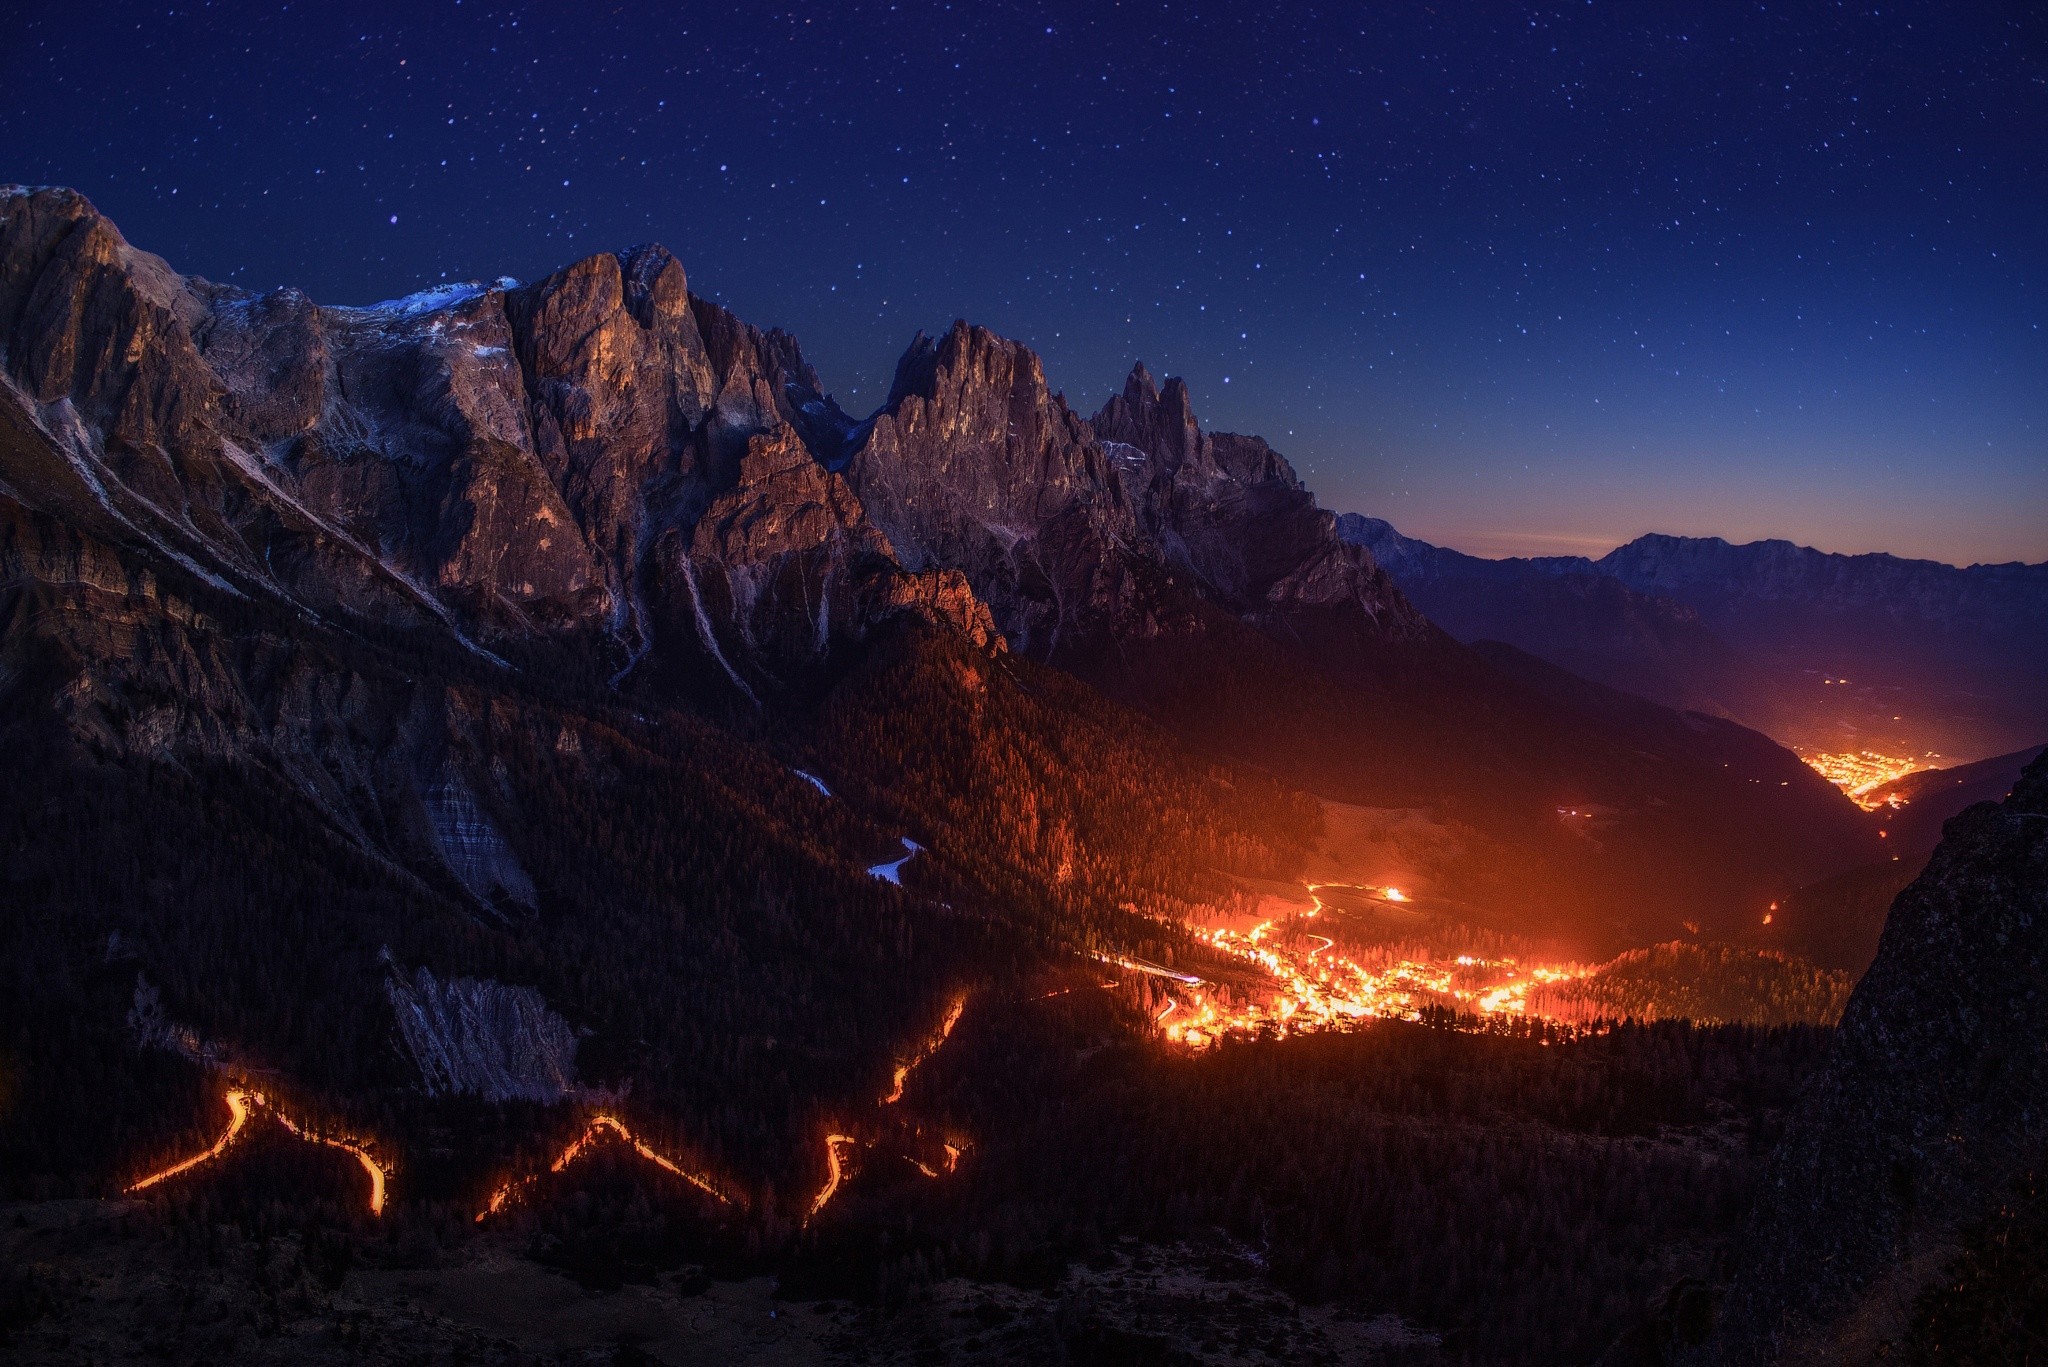 General 2048x1367 fire stars sky night valley mountains Alps lights low light road hairpin turns